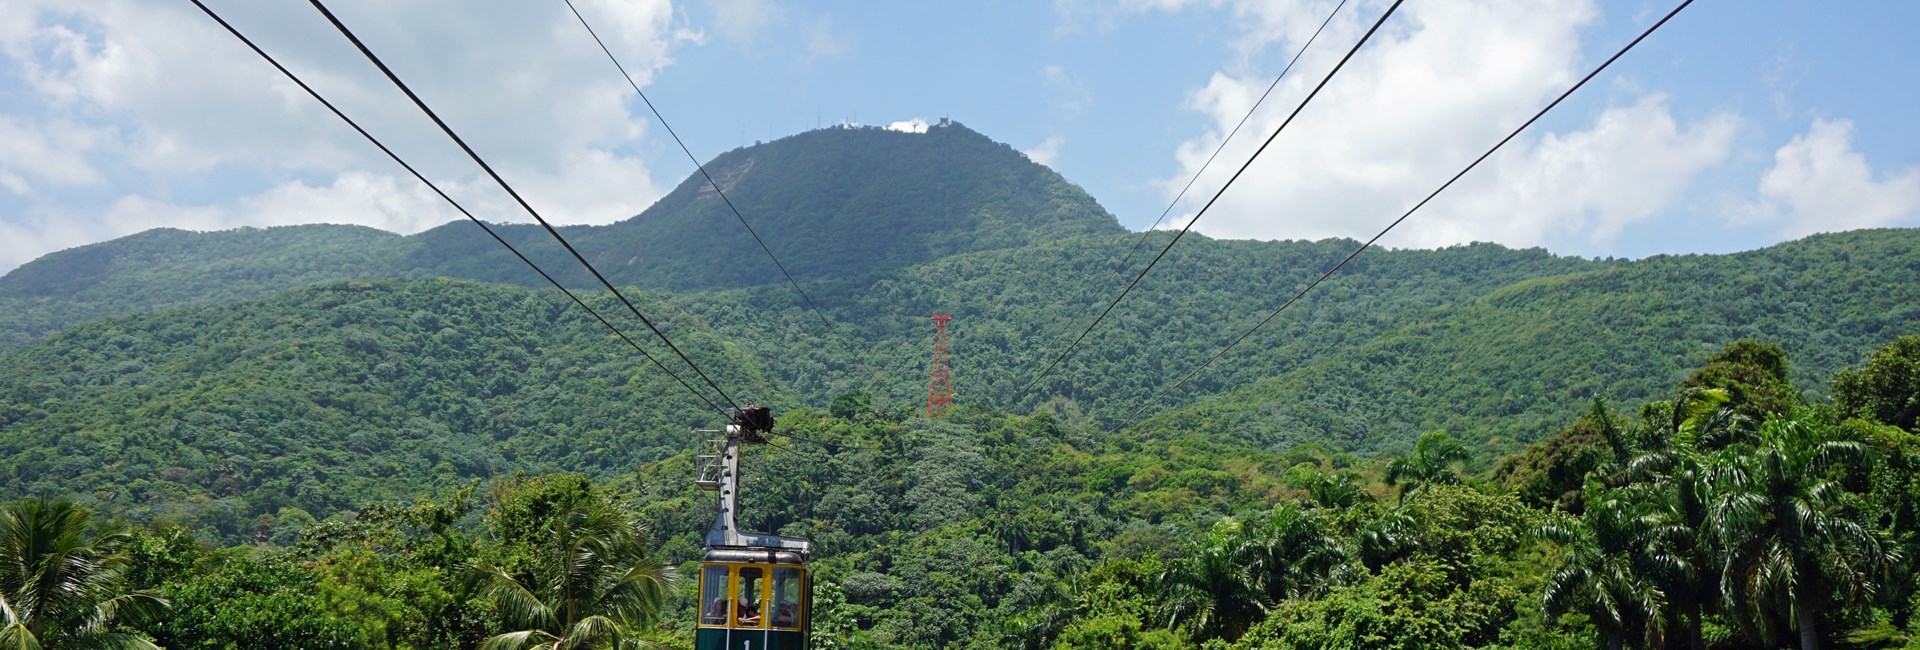 Puerto Plata Cable Car moving up lush mountain